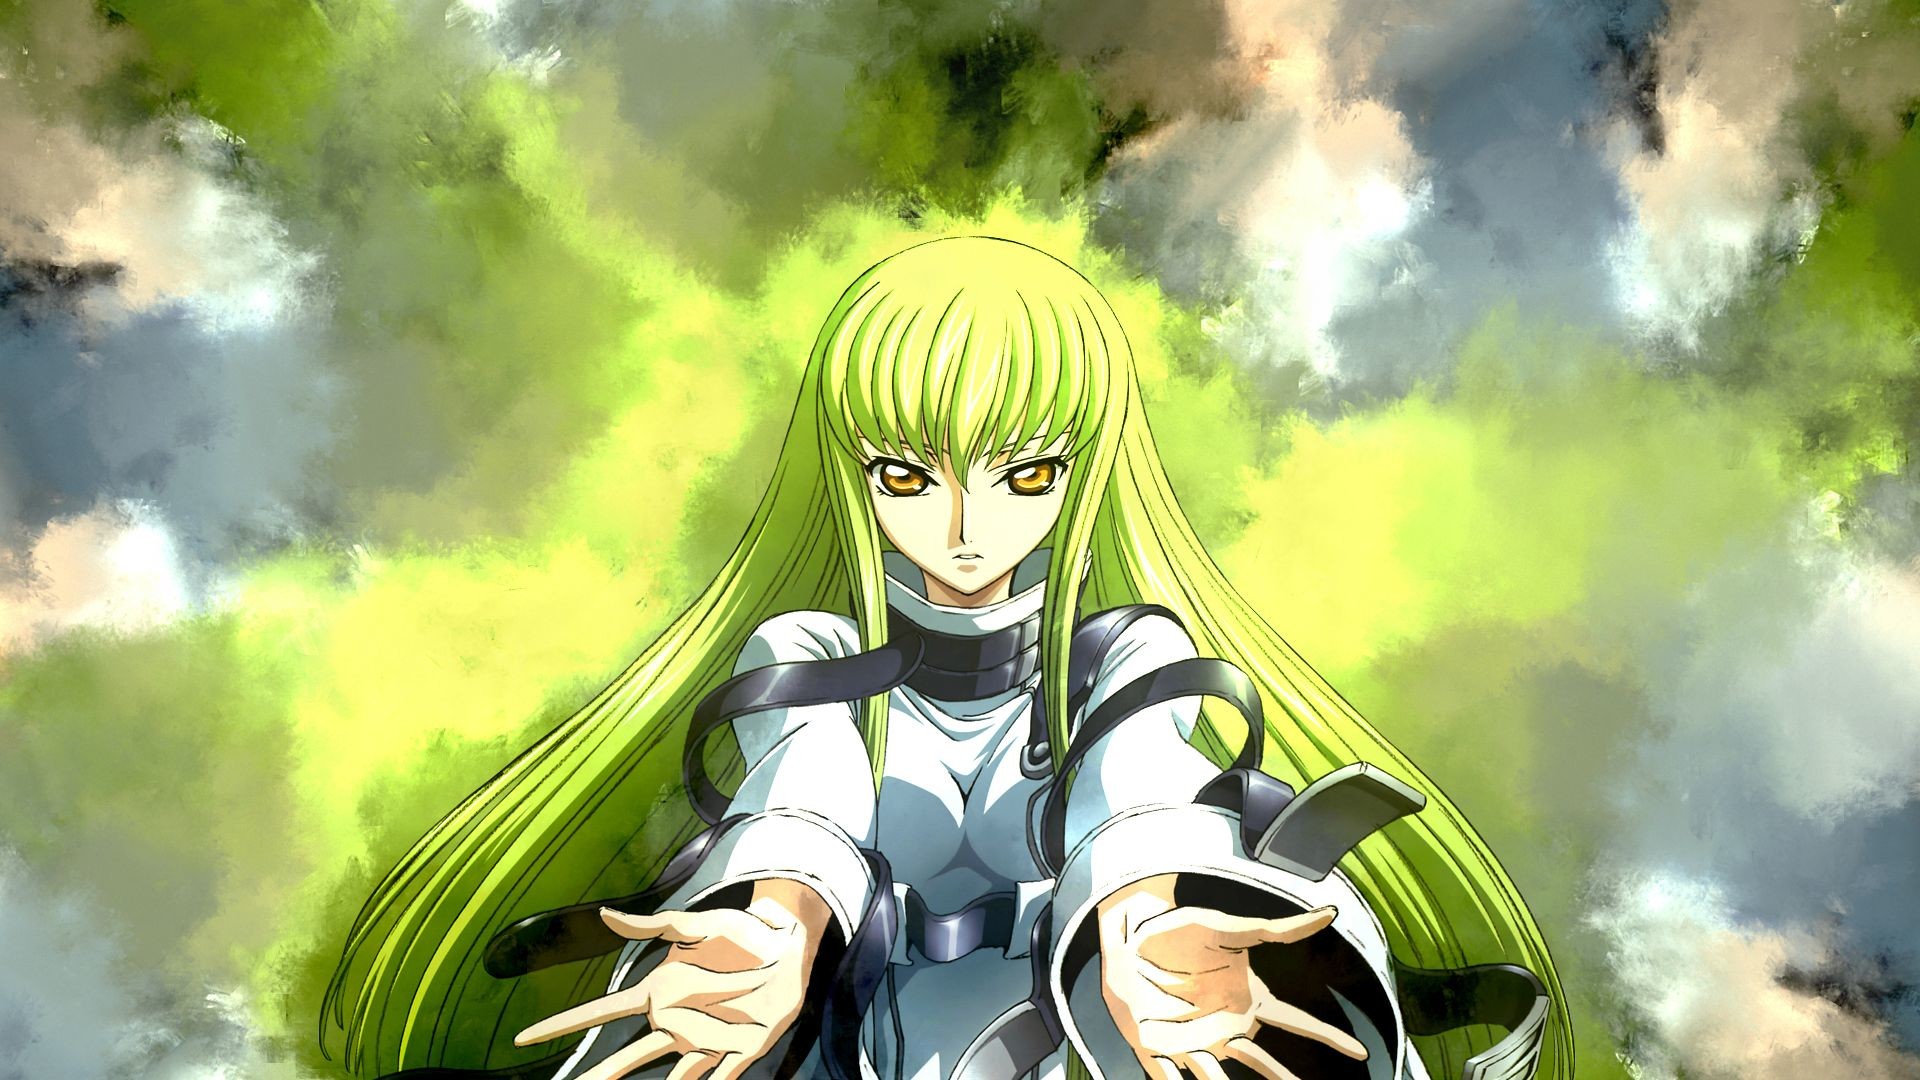 1920x1080 anime ode Geass Wallpapers HD Desktop and Mobile Backgrounds 1920Ã1080